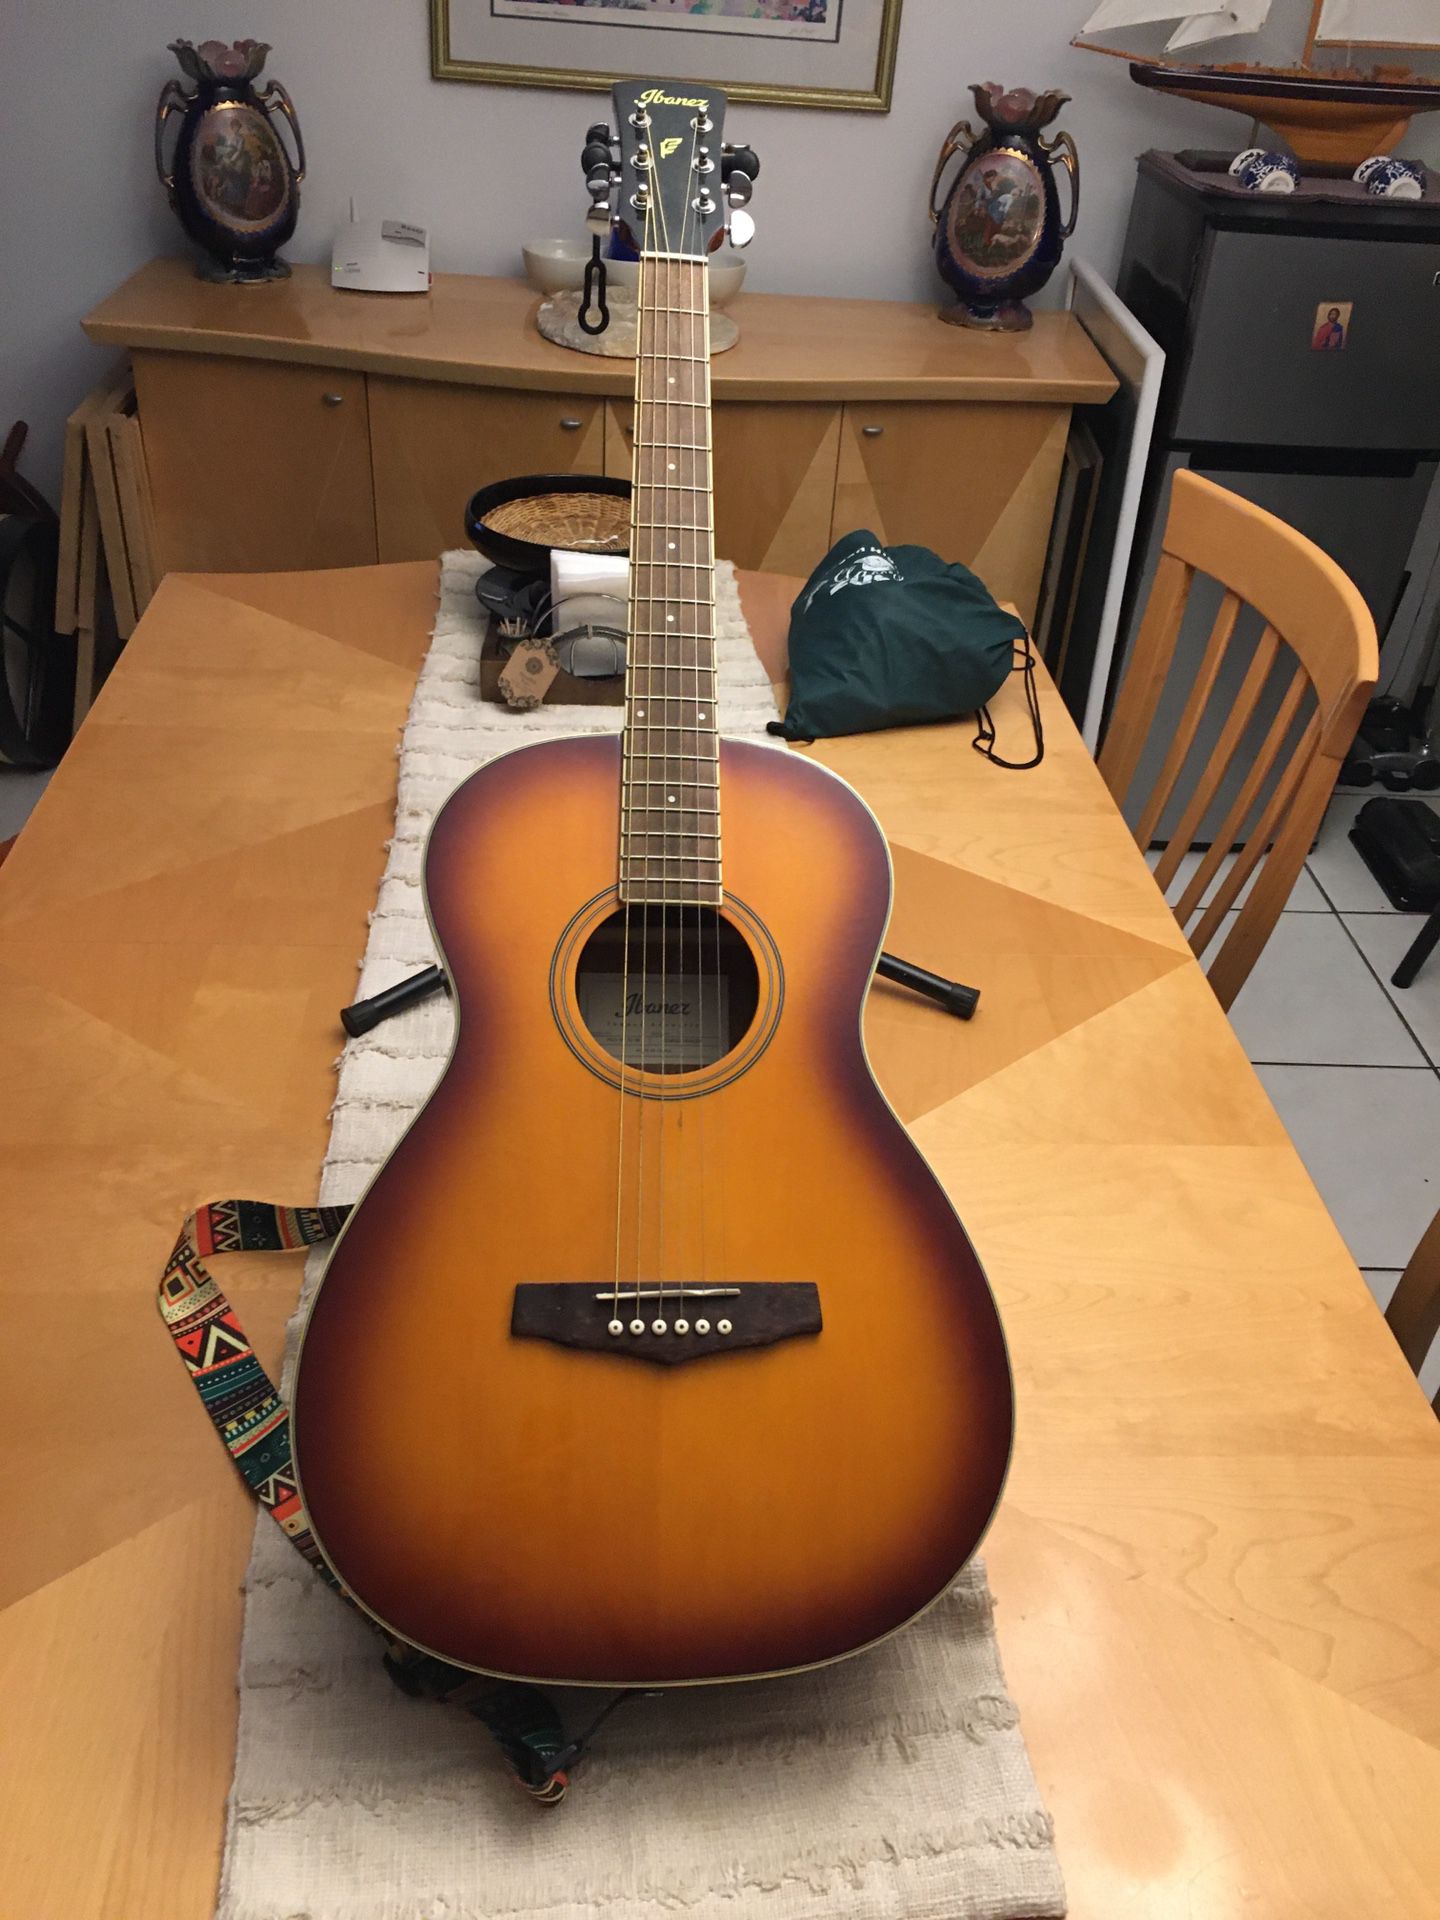 Ibanez PN15 Acoustic Guitar Brown Sunburst with Mahogany Neck, Back and Sides. Fretboard Material is Rosewood. Comes with a stand and Gig bag. Excelle